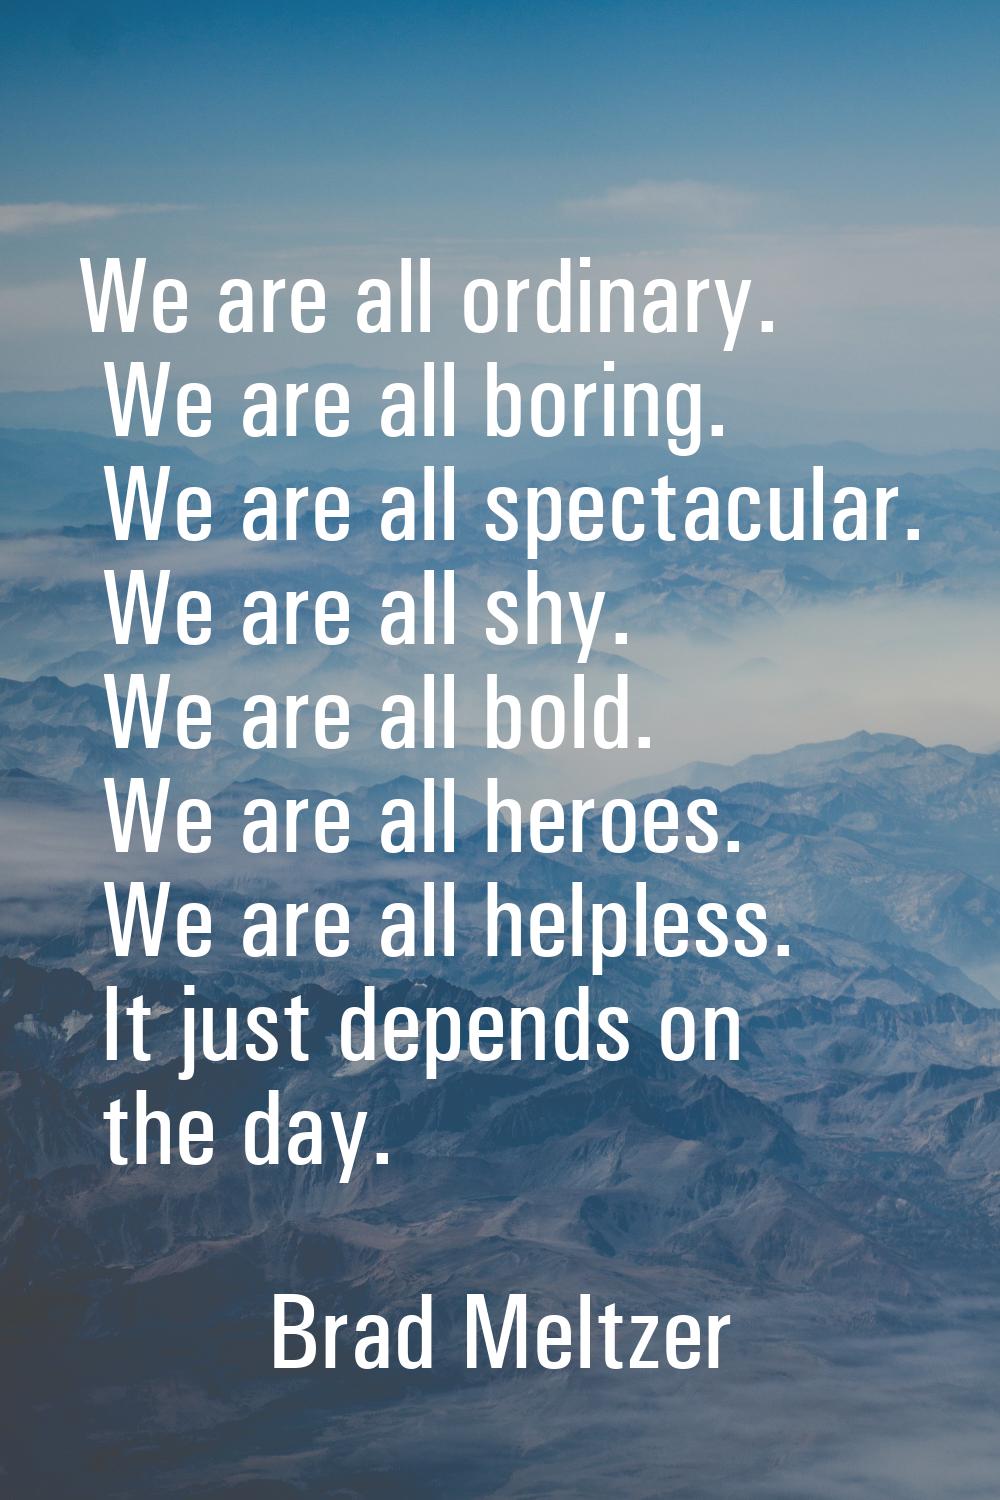 We are all ordinary. We are all boring. We are all spectacular. We are all shy. We are all bold. We